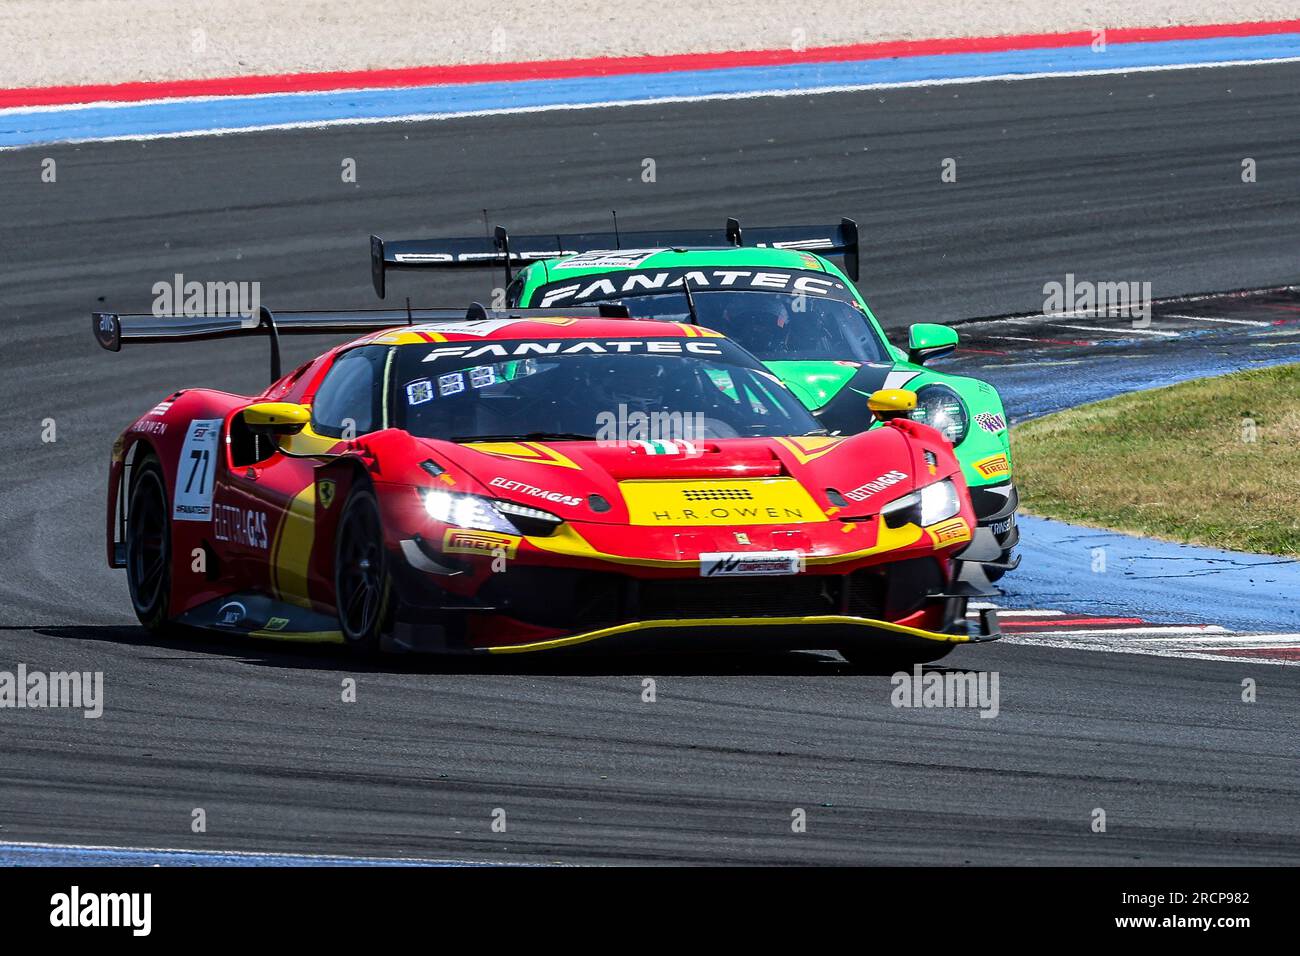 71 Sean HUDSPETH, Nicolas MARINANGELI, AF Corse Ferrari 296 GT3, action during the 5th round of GT World Challenge Europe Sprint Cup 2023, at Misano, Italy from July 14 to 16, 2023 - Photo Grégory Lenormand/DPPI Credit: DPPI Media/Alamy Live News Stock Photo